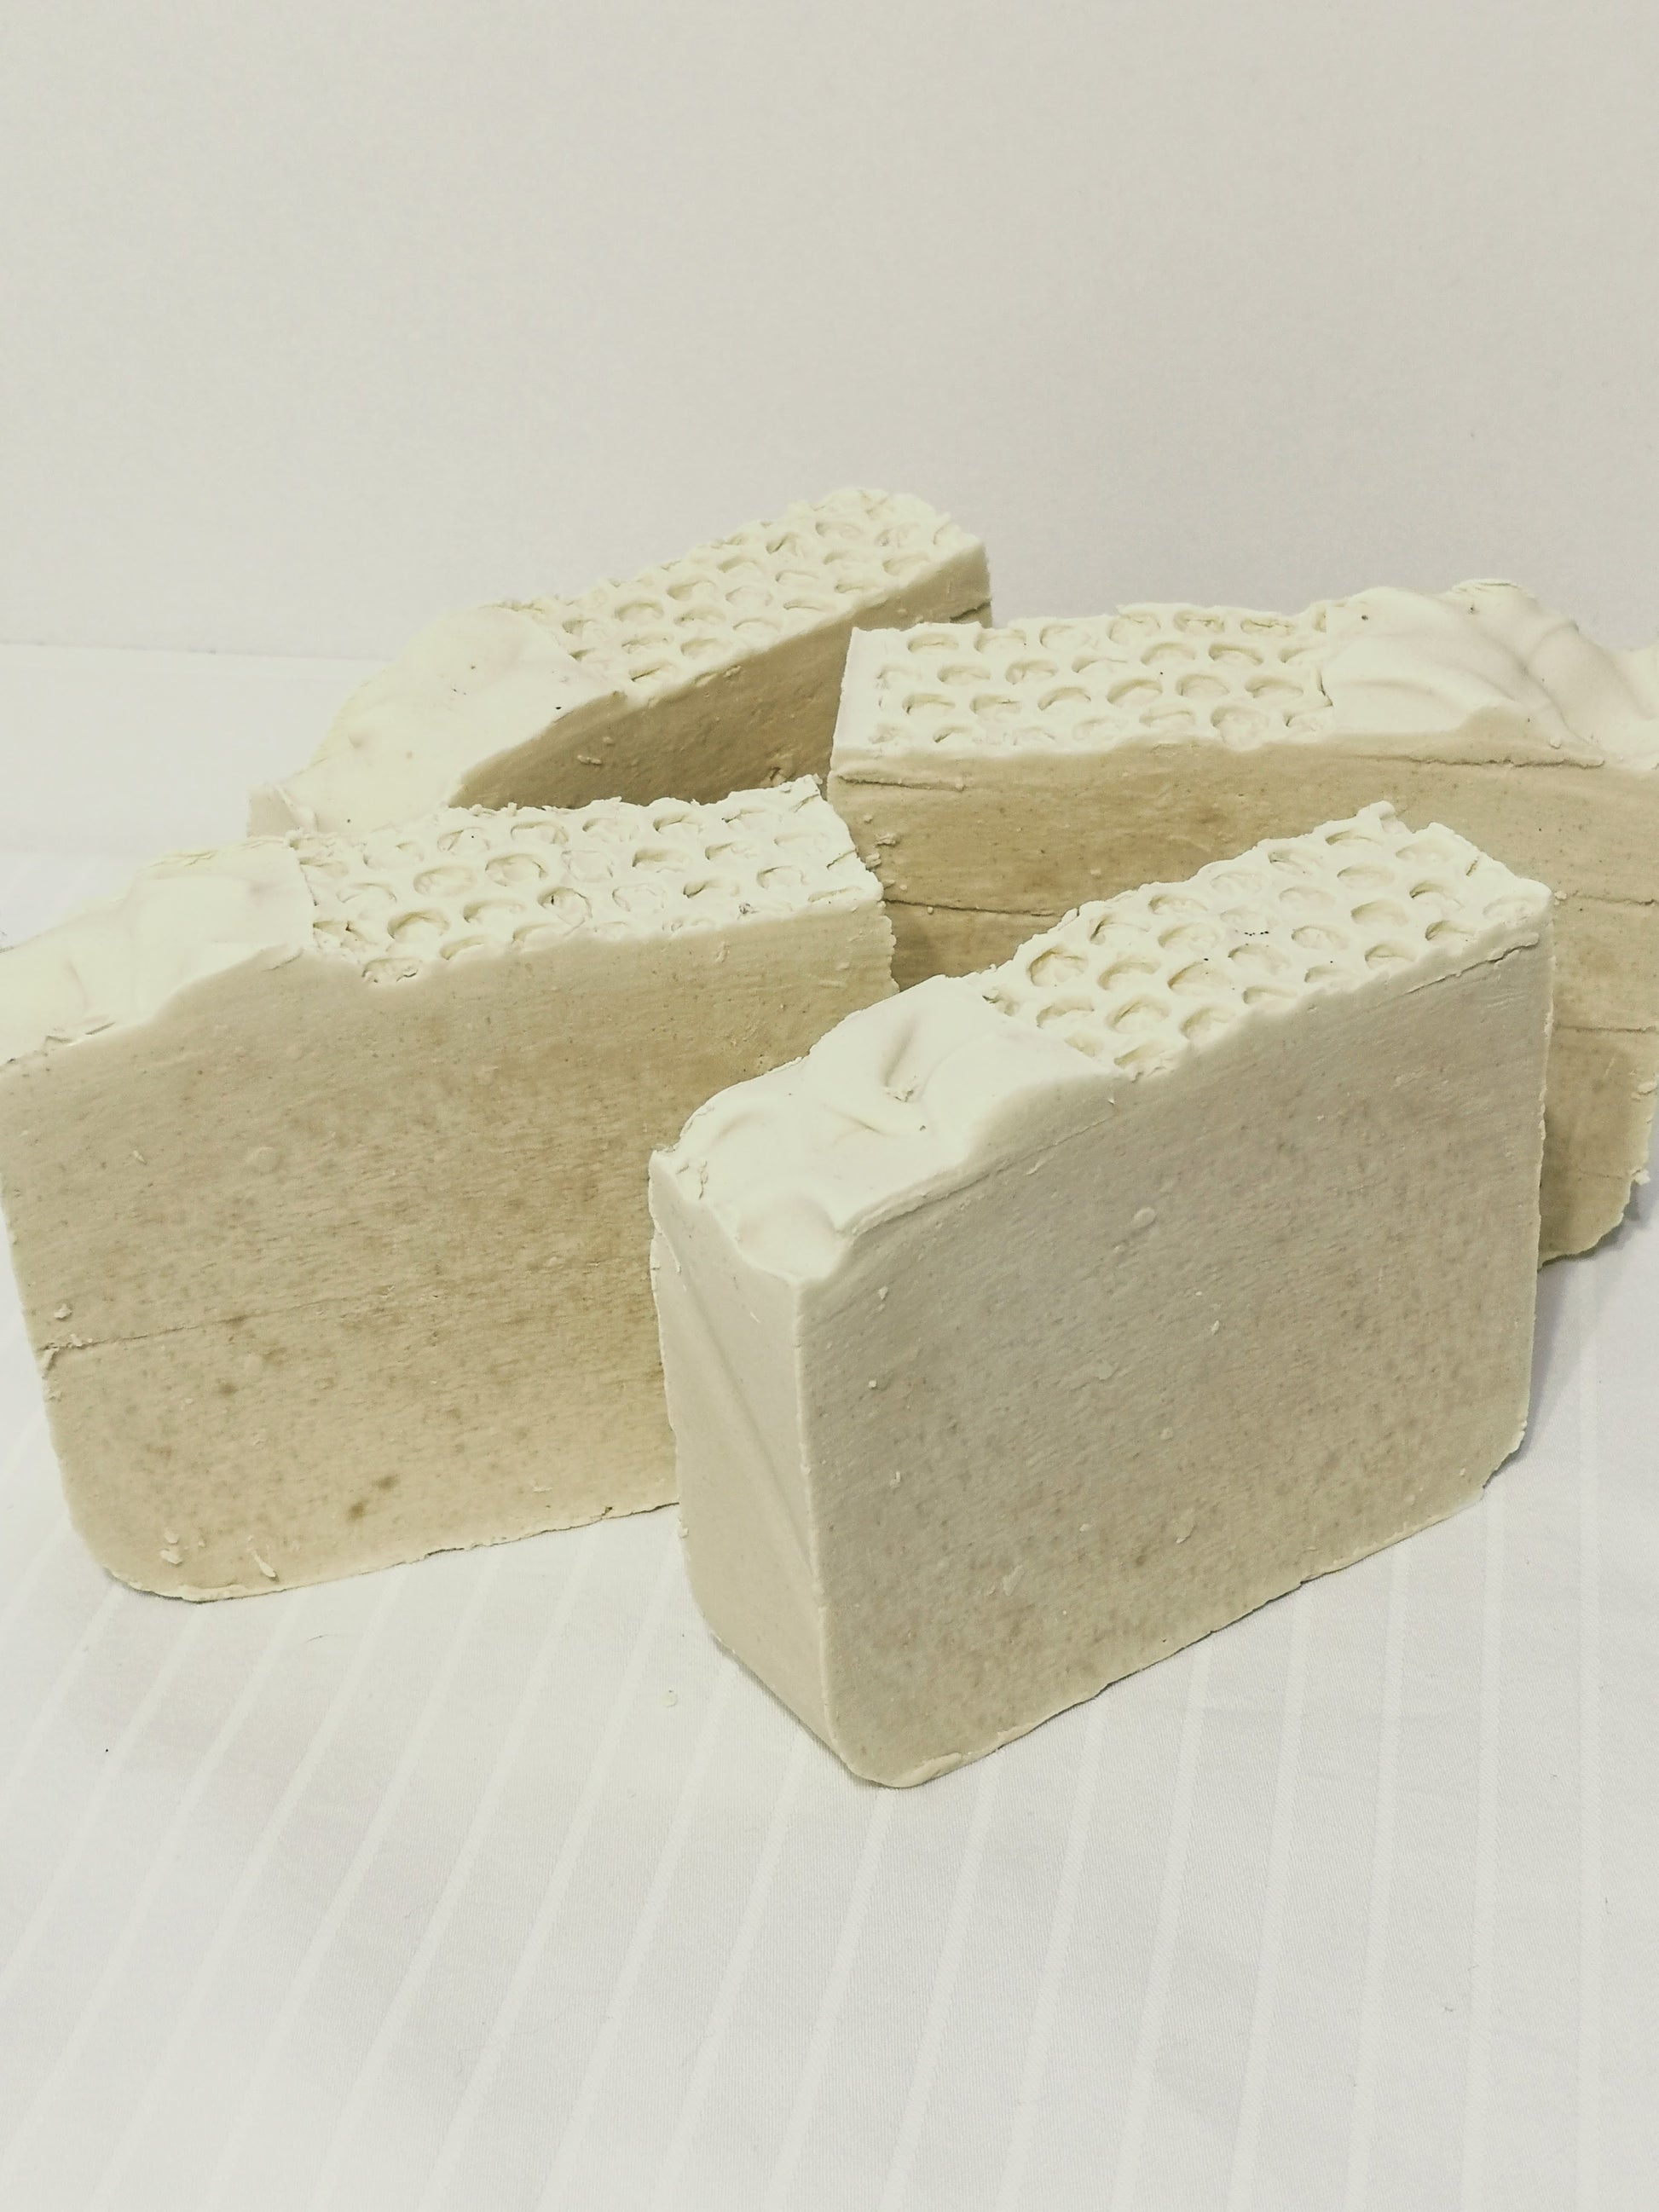 4 bars of creamy white soap with textured top on an off-white background. 